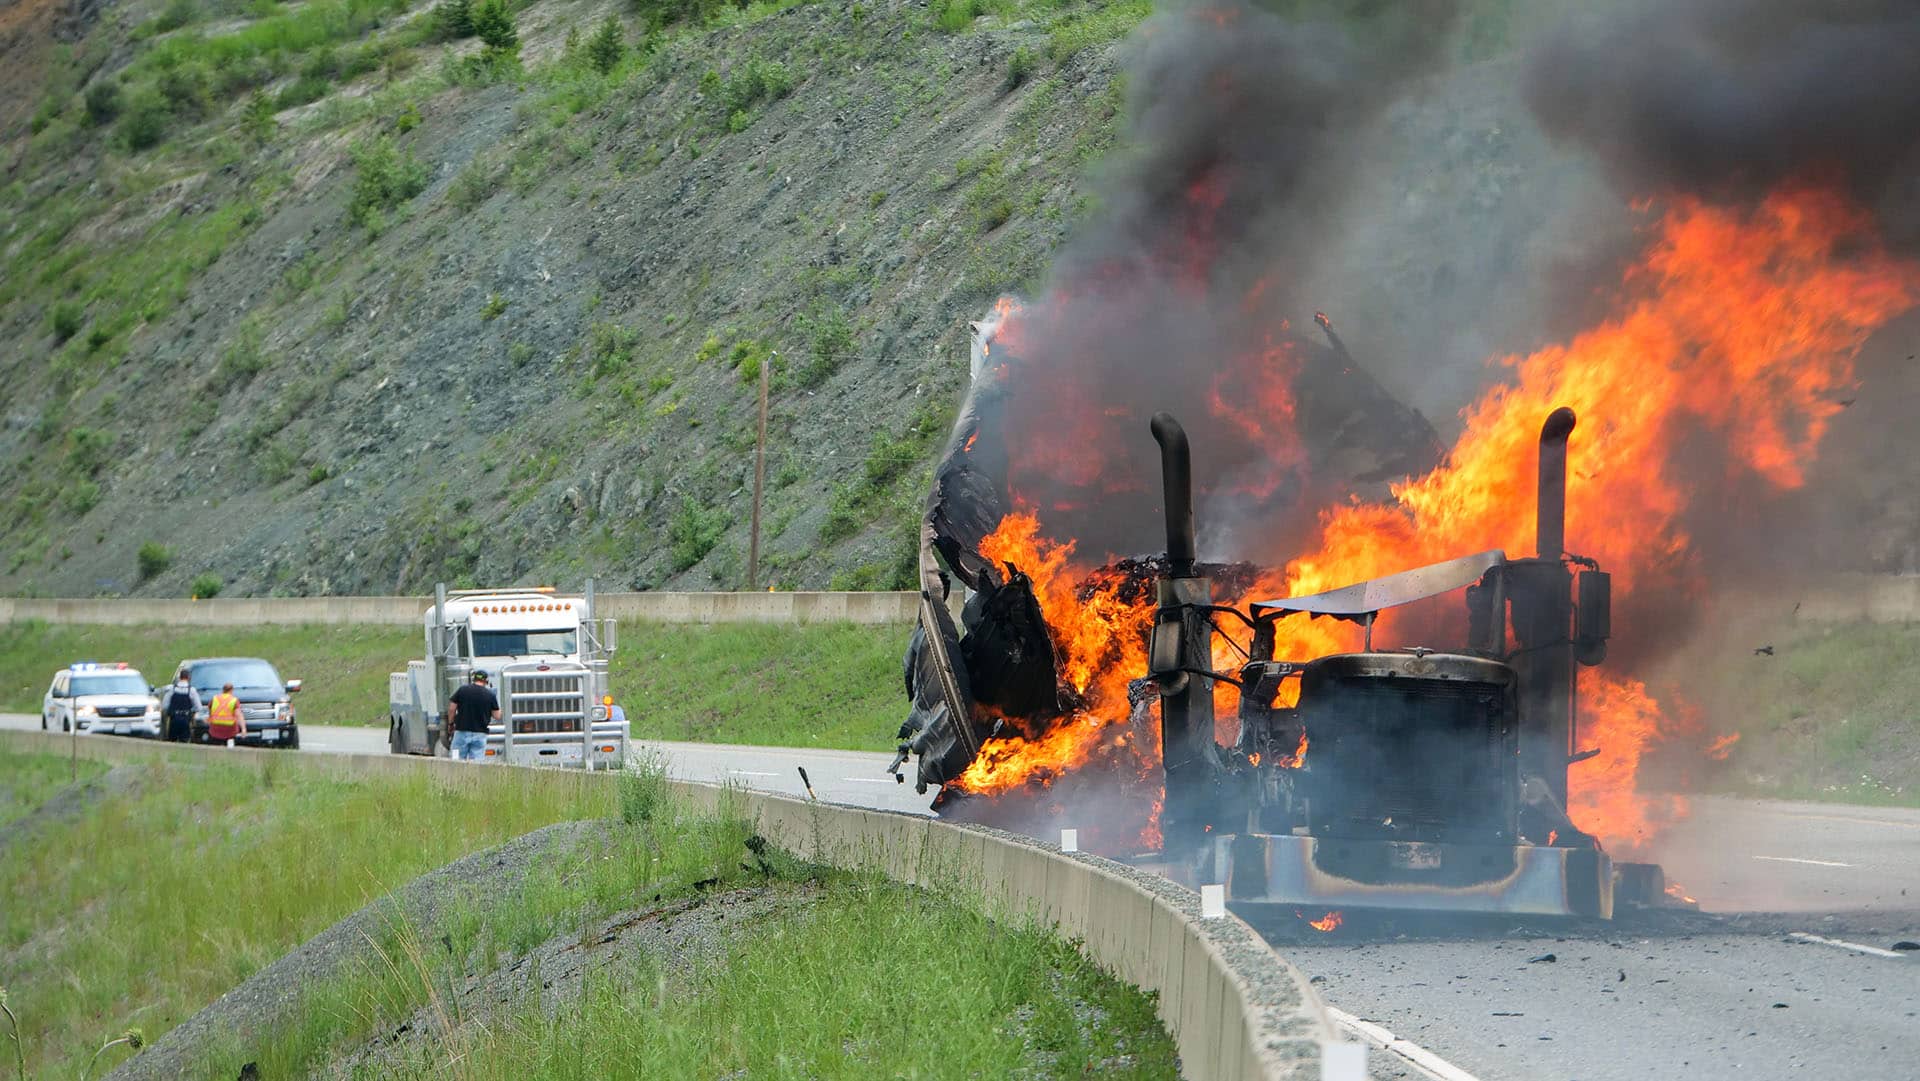 A semi truck burns on the side of the highway